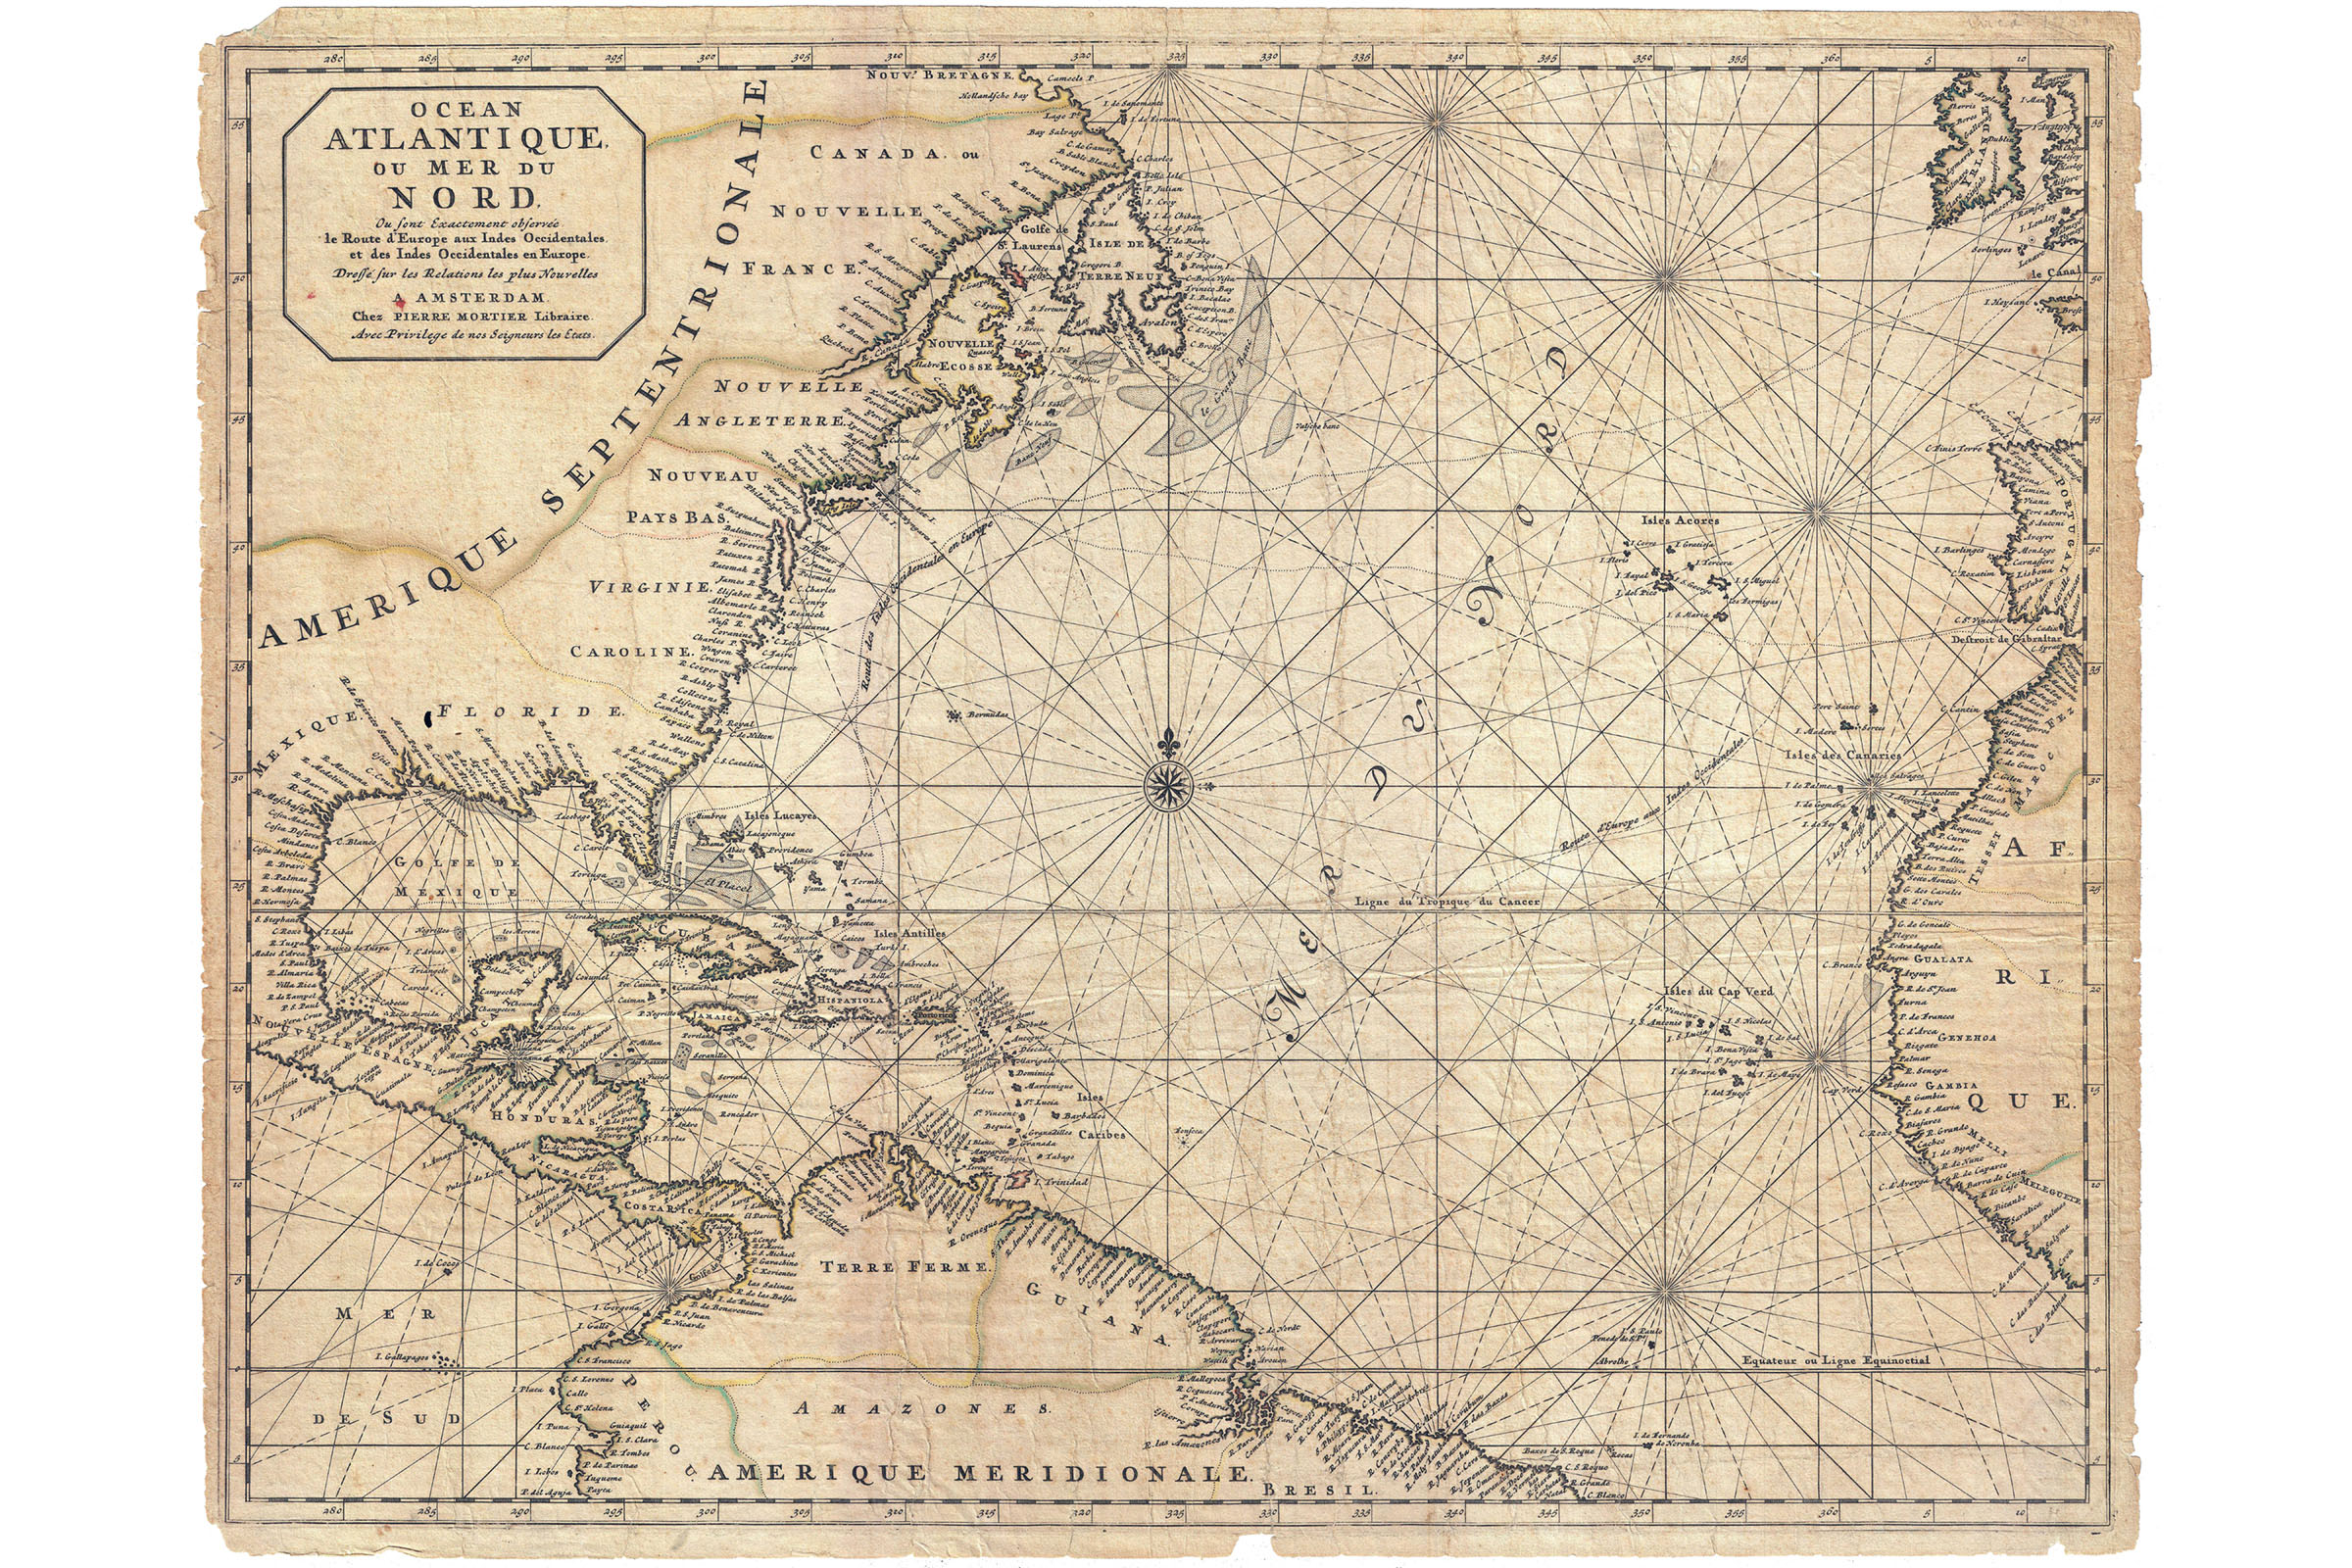 North Atlantic; Antique Map; Nautical Chart by Mortier, 1683 eBay